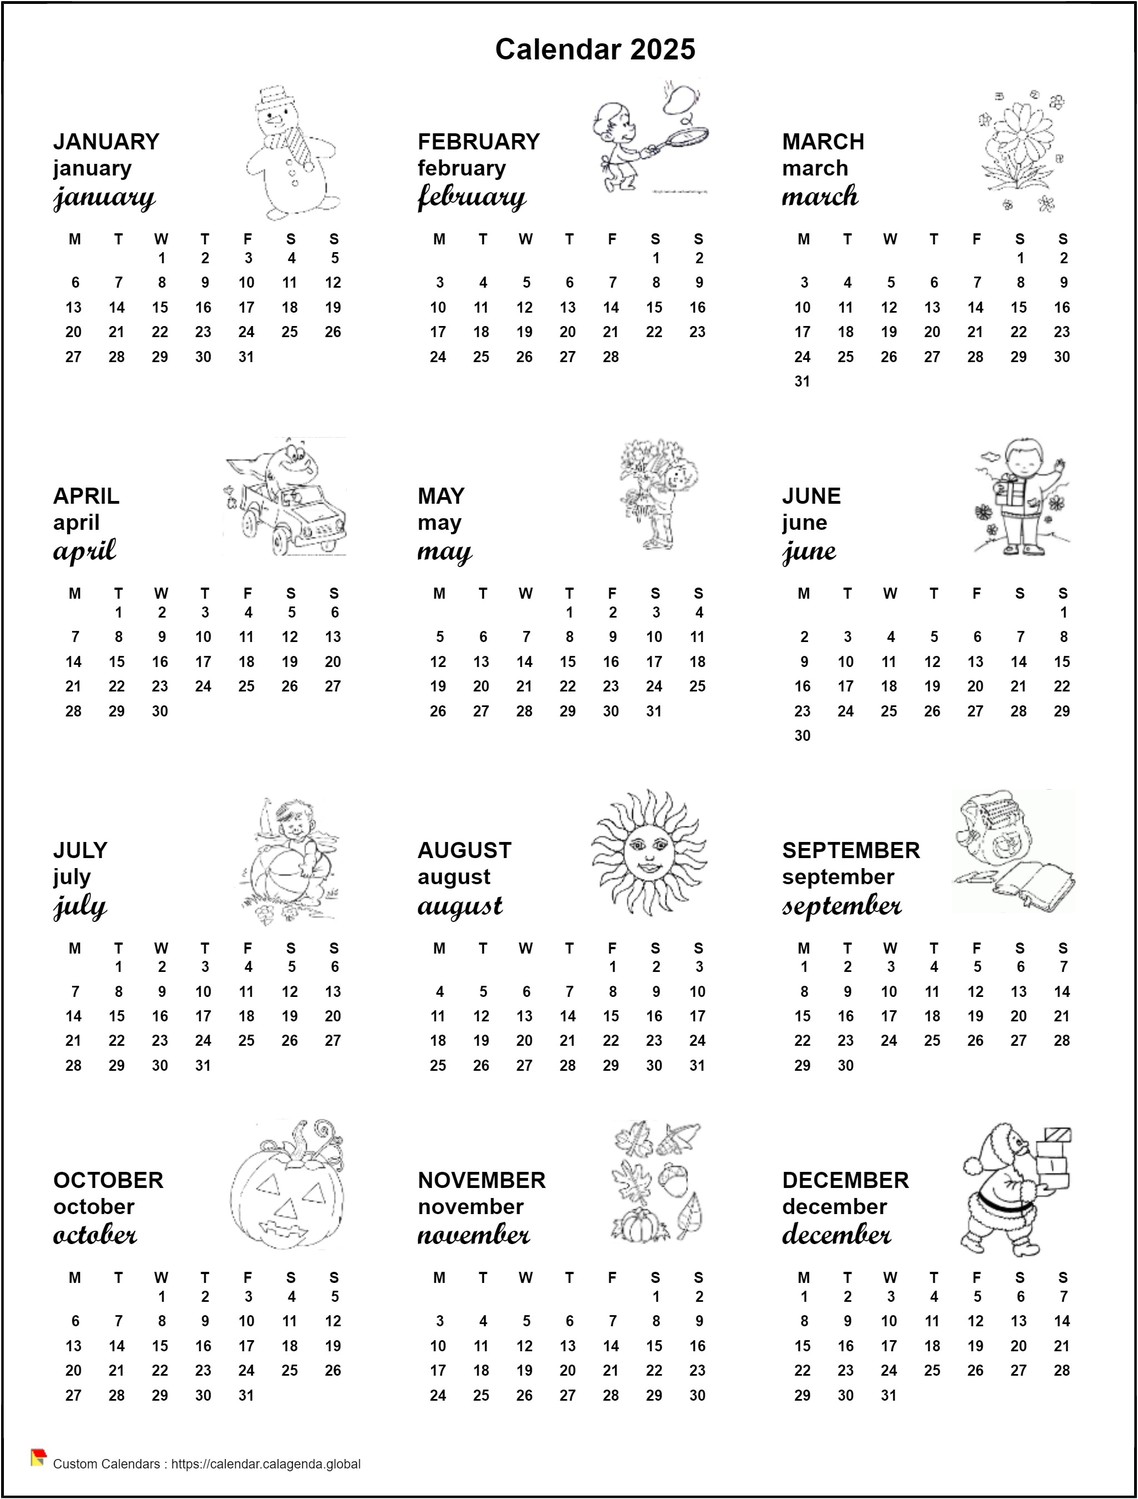 Calendar 2095 annual maternal and primary school